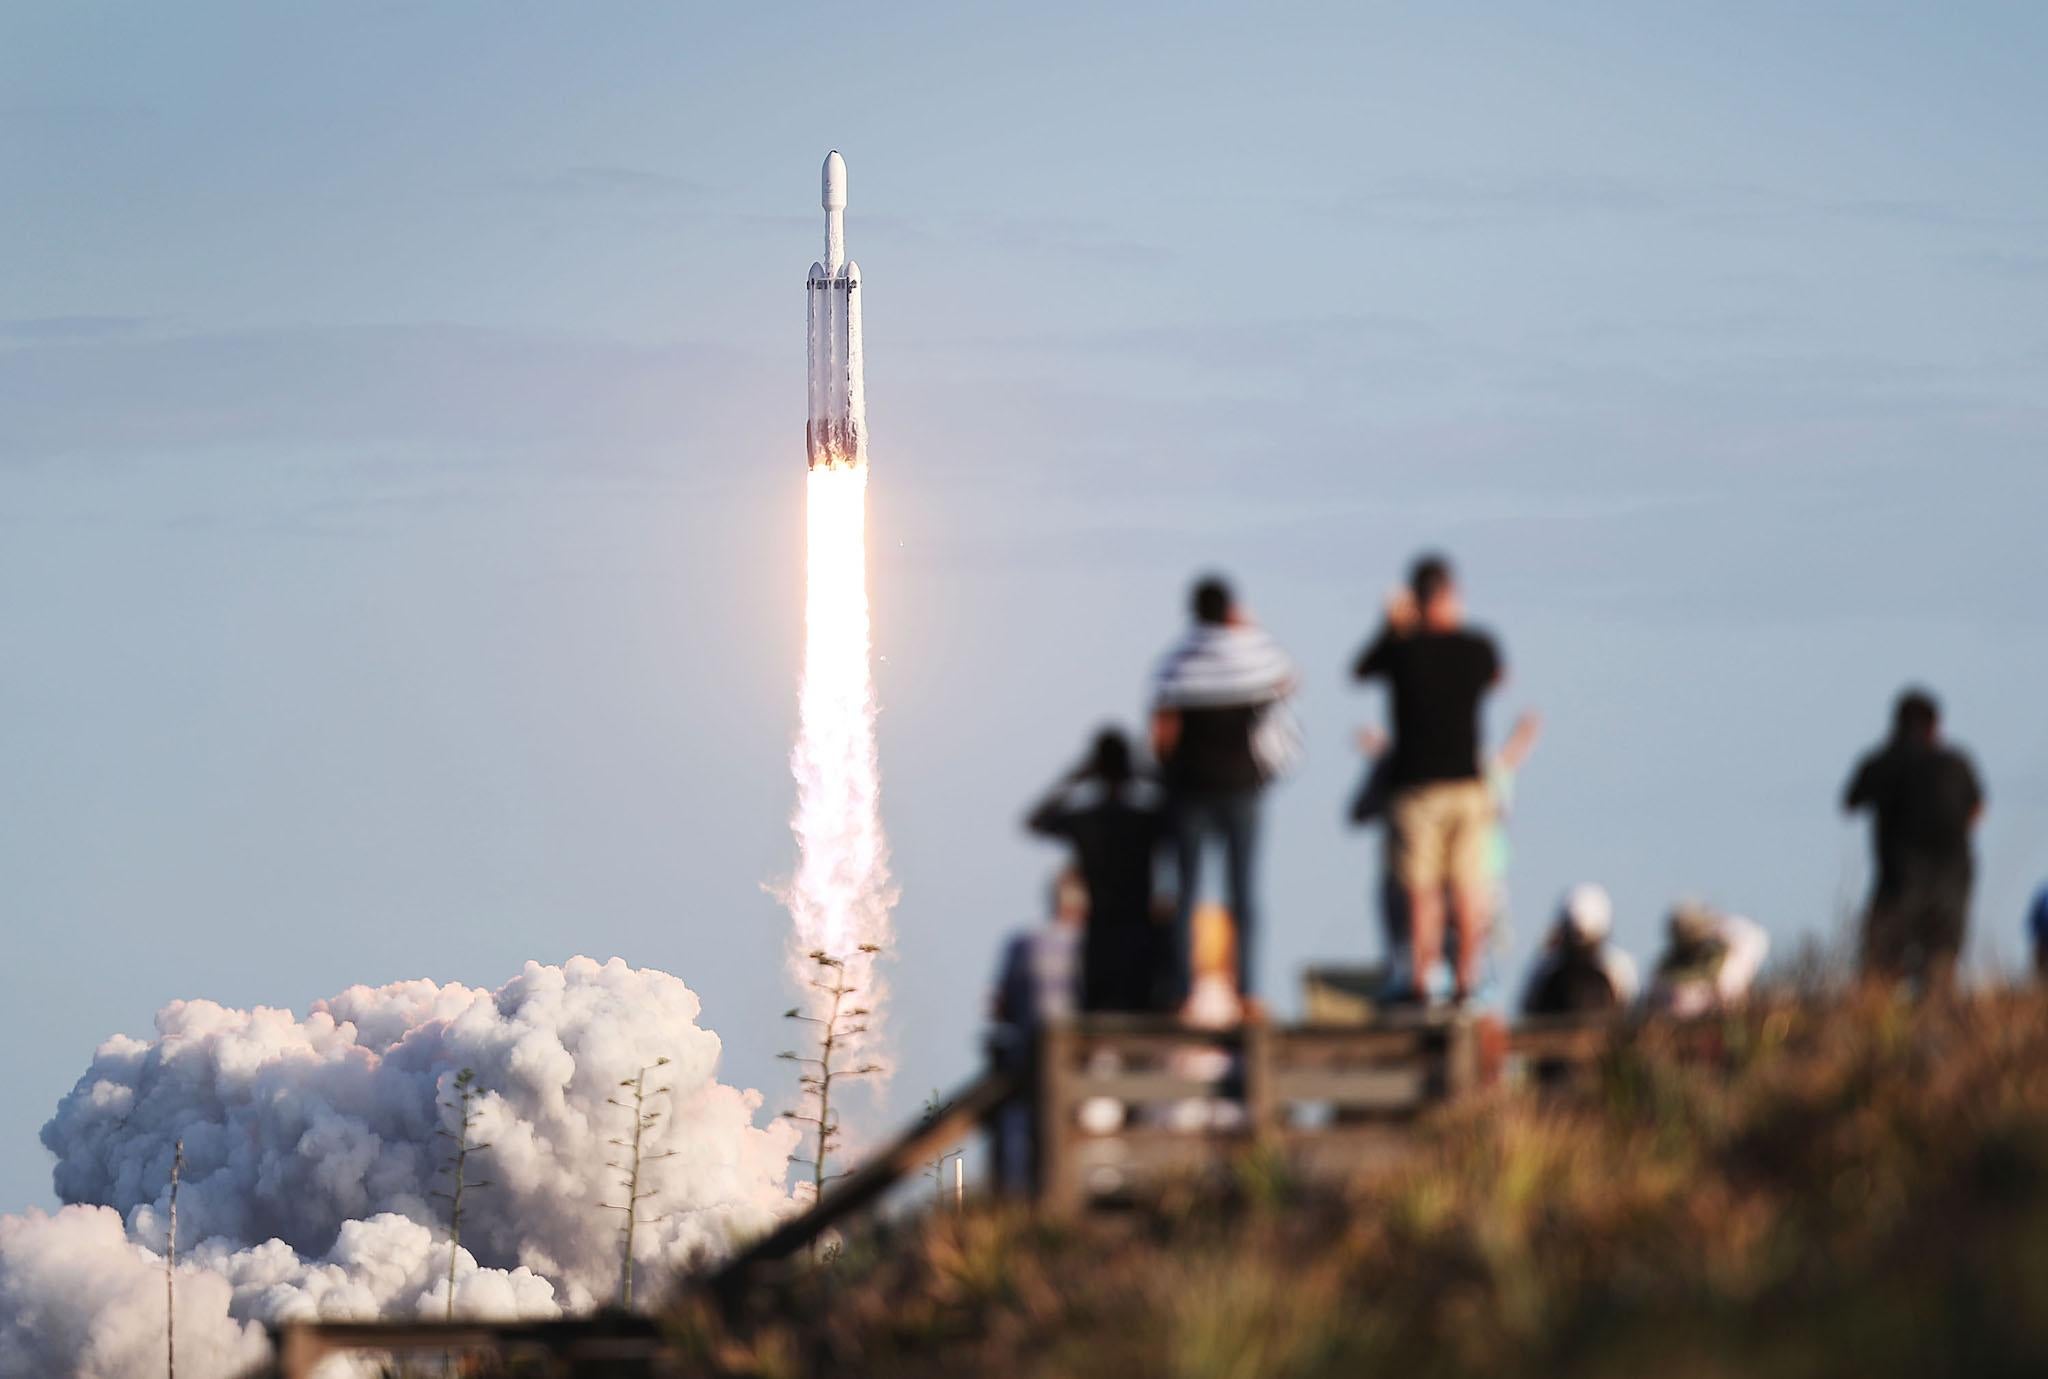 People watch as the SpaceX Falcon Heavy rocket lifts off from launch pad 39A at NASAs Kennedy Space Center on April 11, 2019 in Titusville, Florida